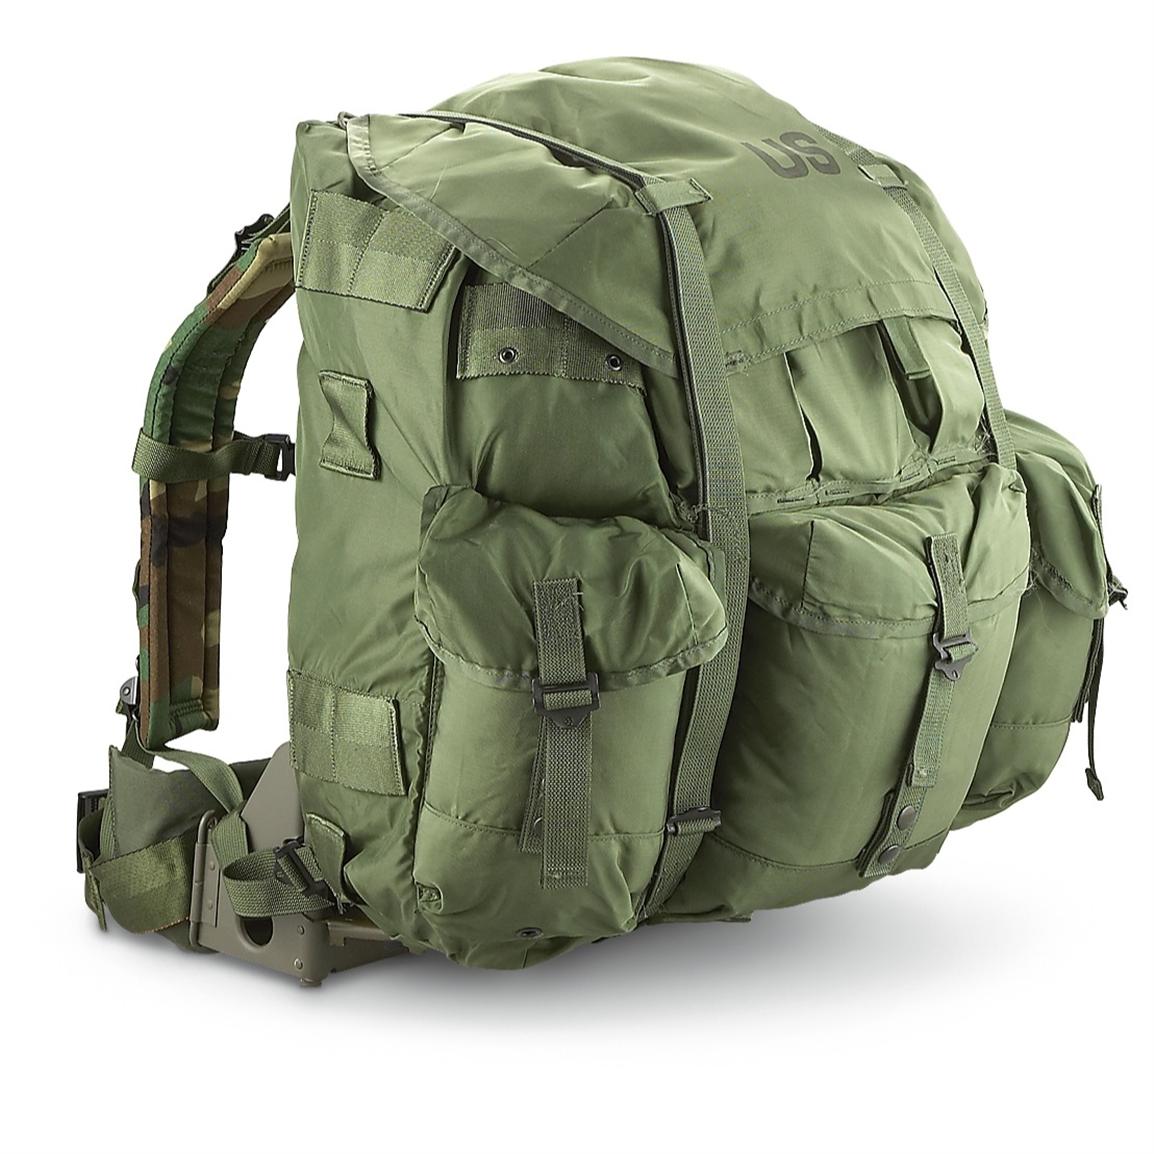 New U.S. Military - issue Large A.L.I.C.E. Pack with Frame and Shelf - 206927, Rucksacks ...